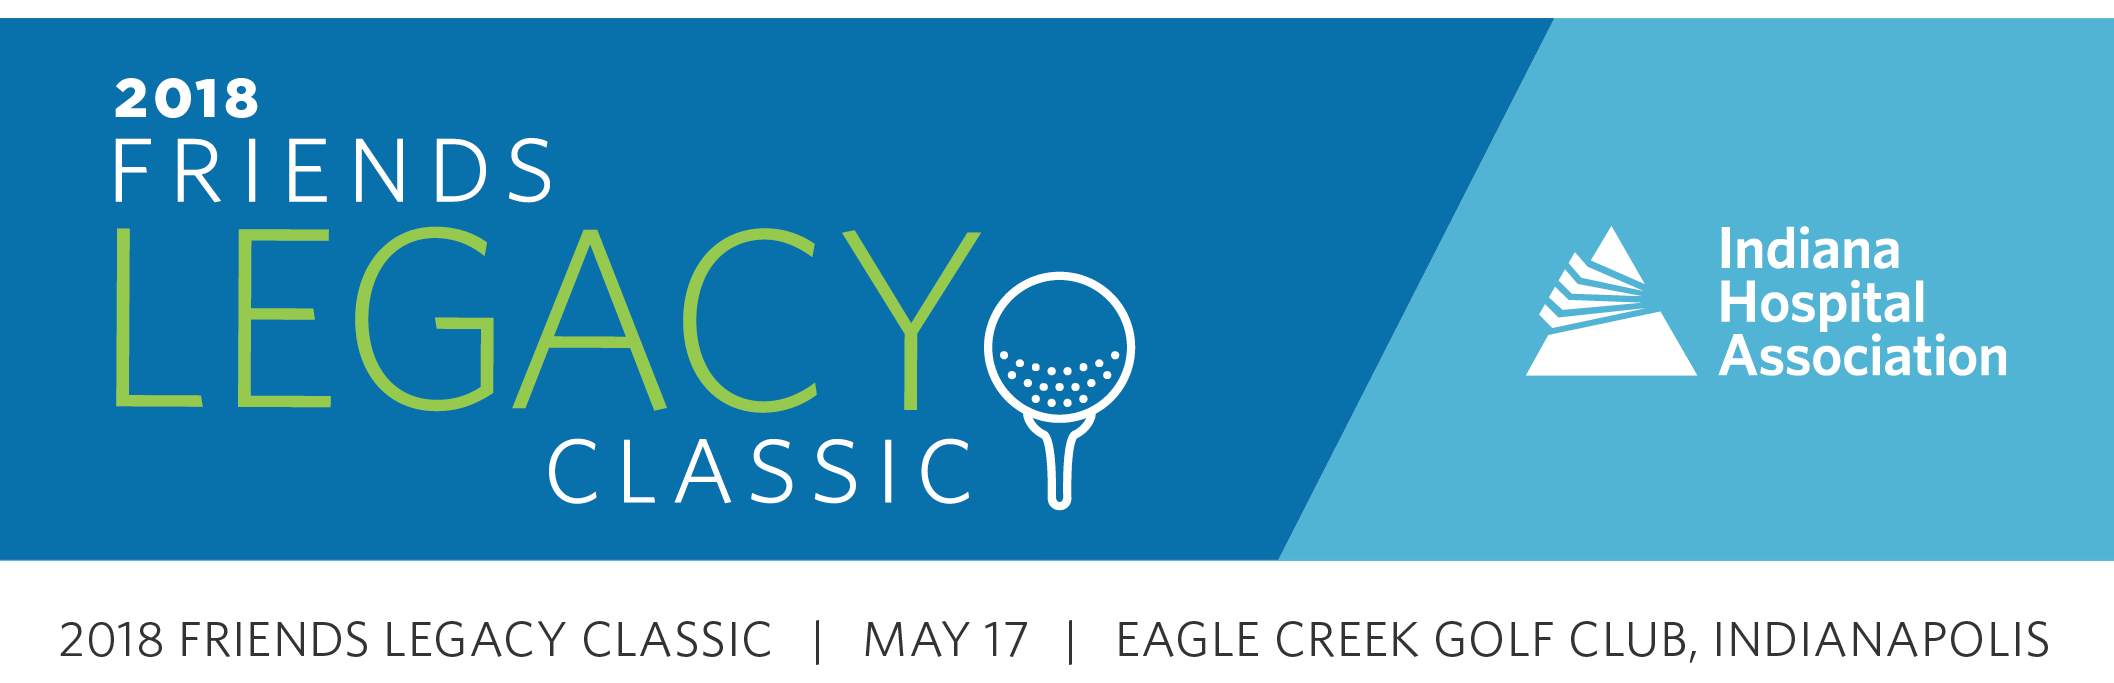 2018-LegacyClassic-Header3 (002).png